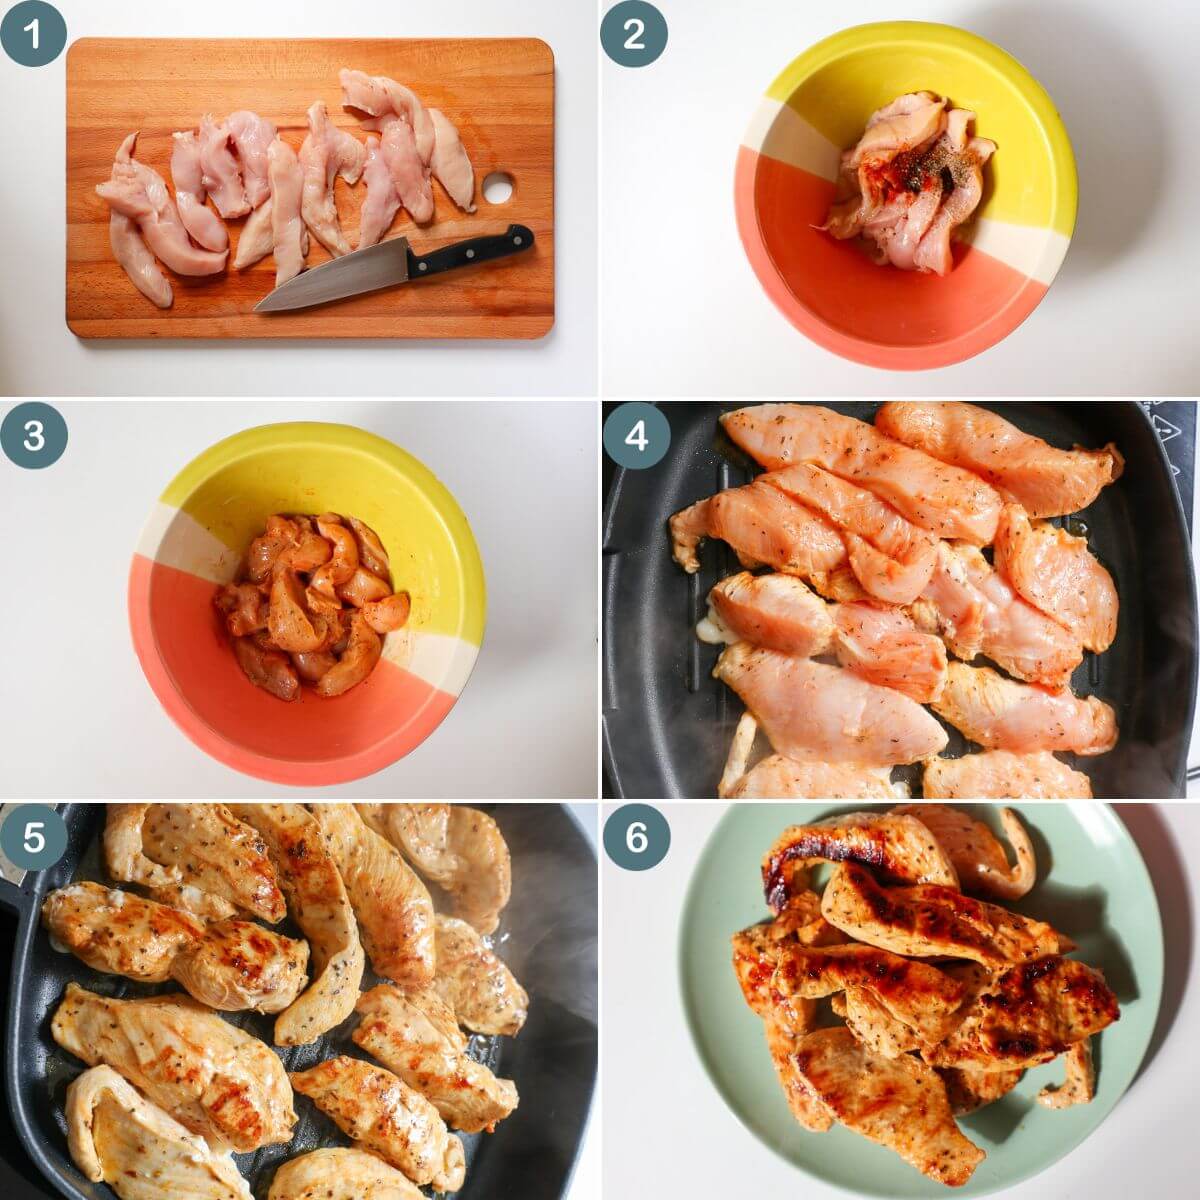 Collage of images showing the steps to make the recipe.